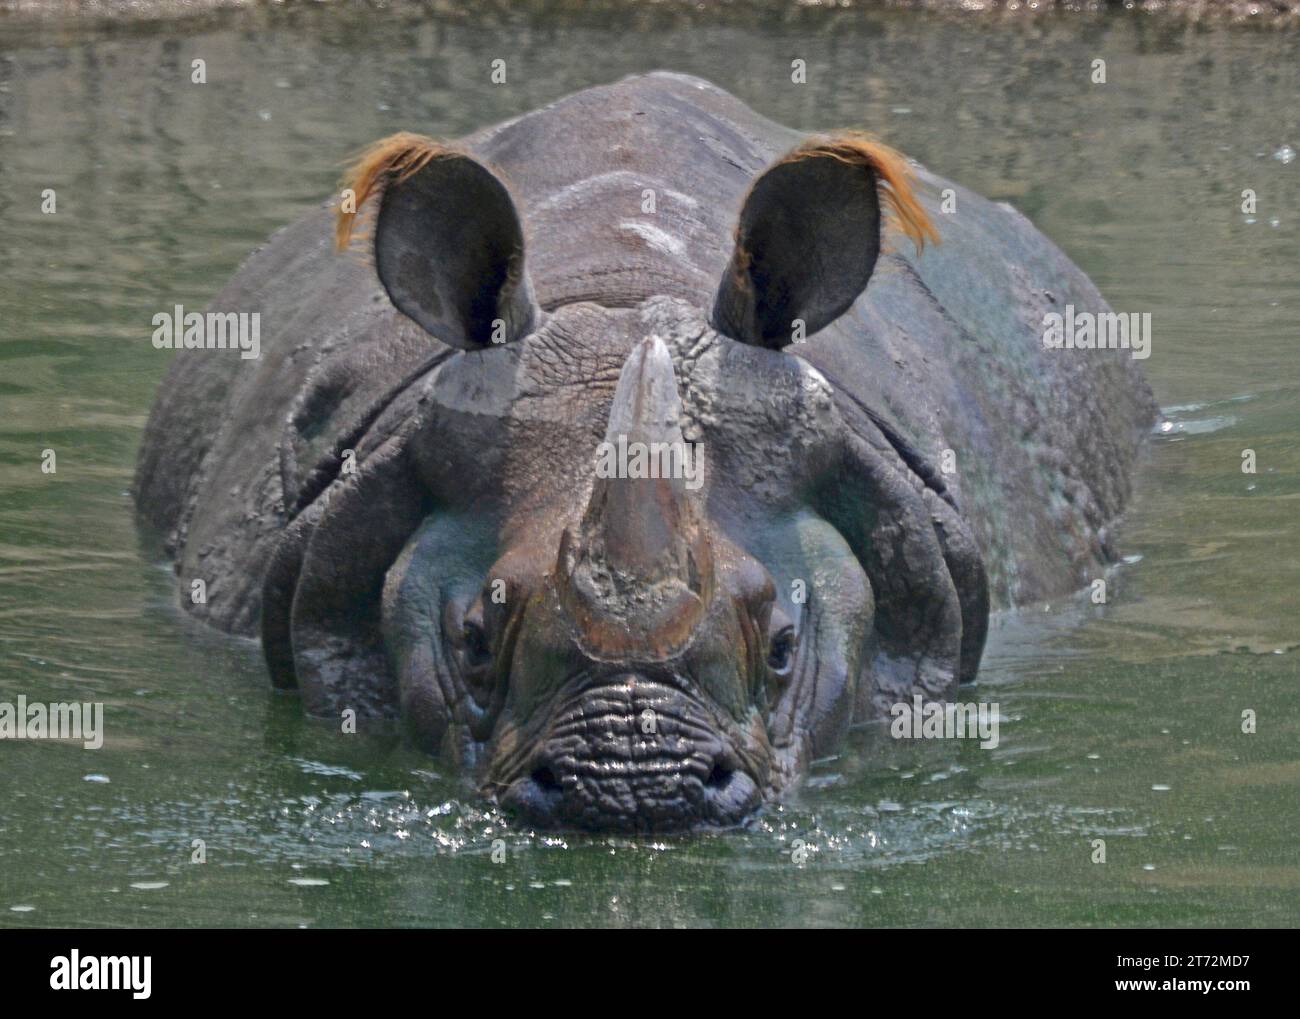 Rhinoceros, Greater One Horned Rhino in the pond blowing bubbles Stock Photo